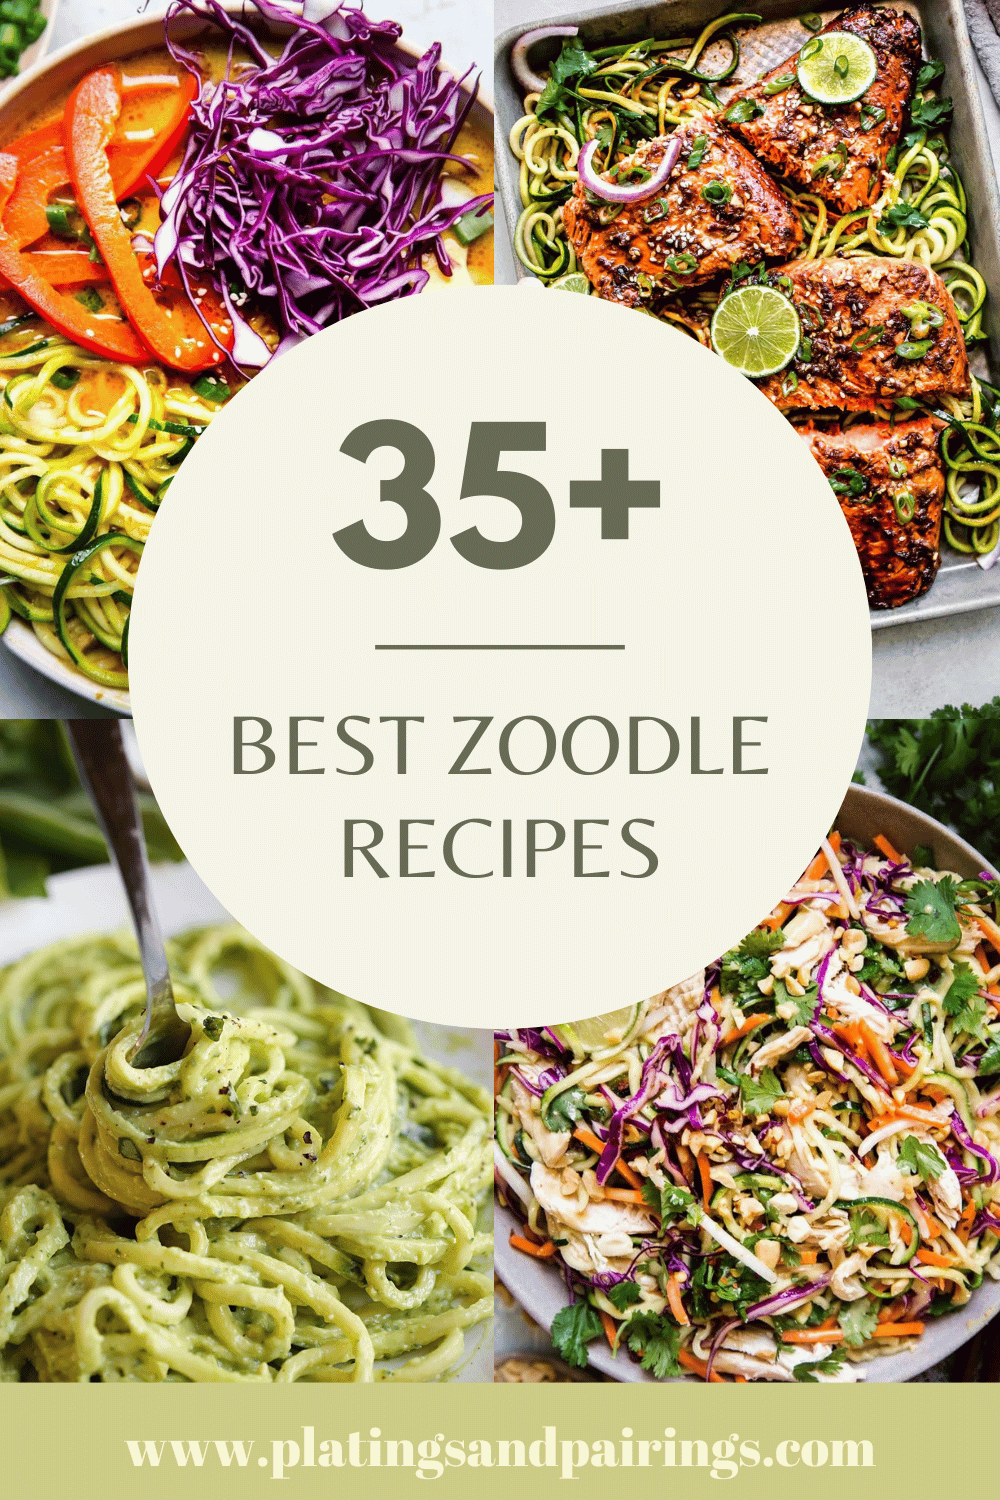 Collage of zoodle recipes with text overlay.